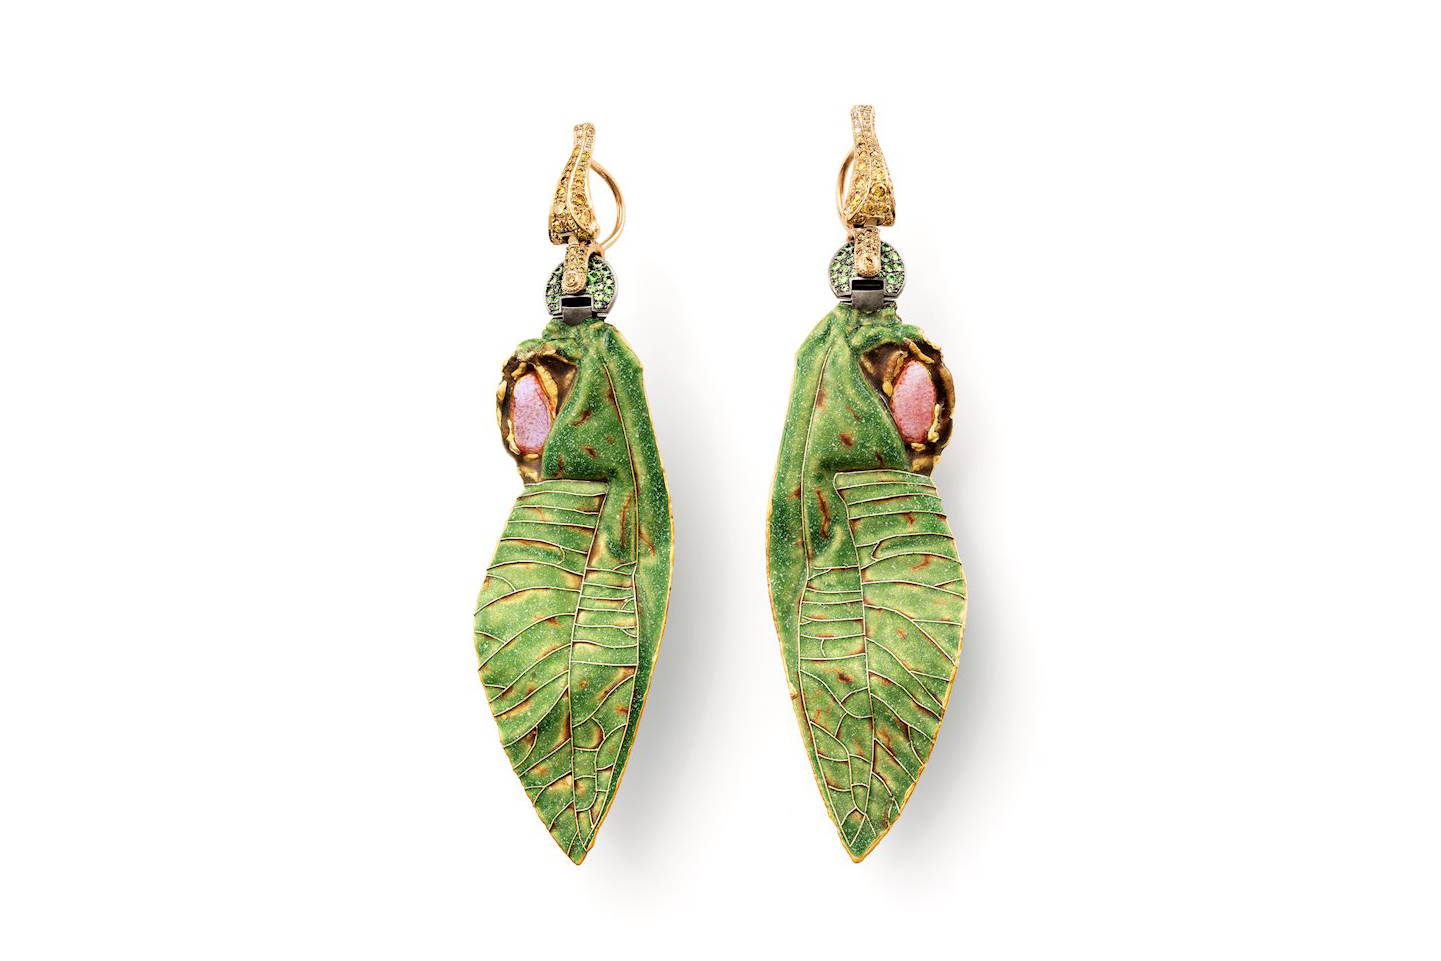 Otto Jakob Tettix earrings with tsavorites, fancy yellow and light brown diamonds, vitreous enamel and plique-à-jour enamel in painted yellow gold